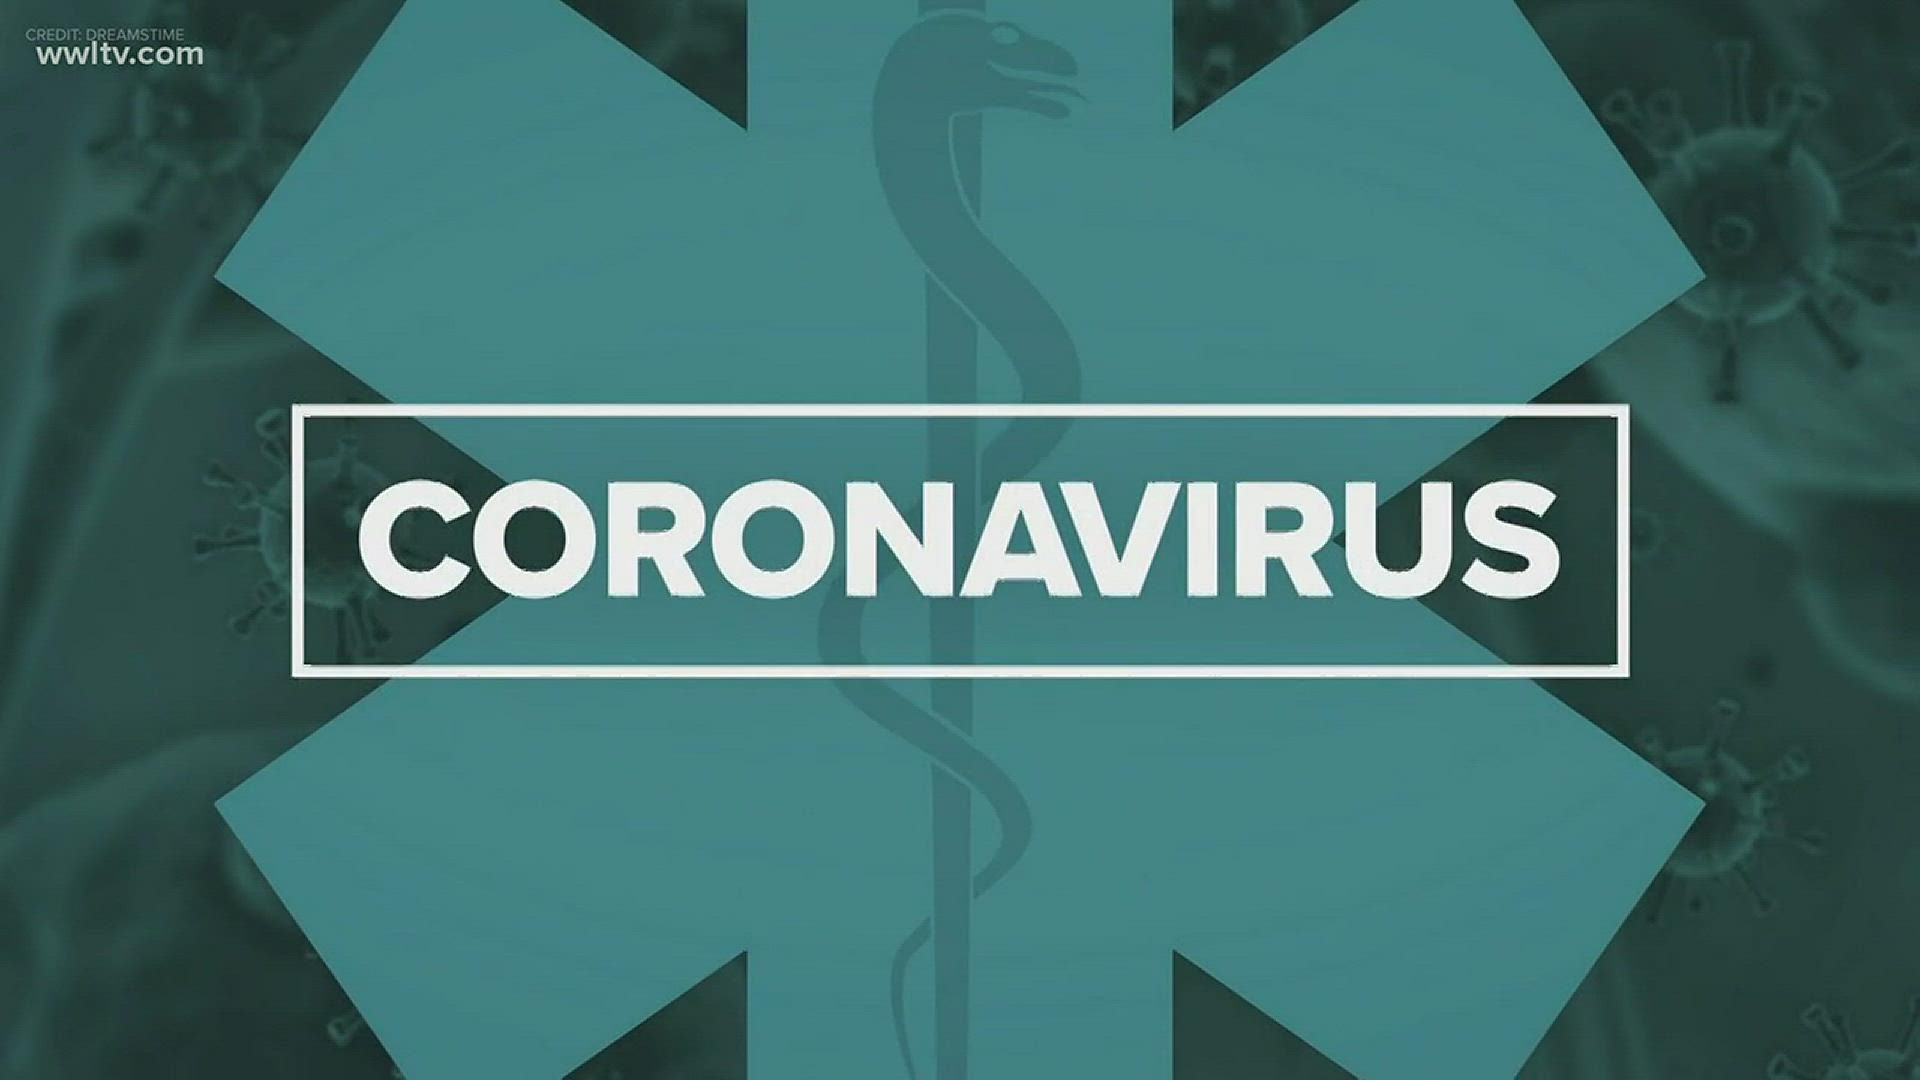 The governor said Louisiana has had a 19% increase in COVID-19 cases from noon Thursday to noon Friday, but he said coronavirus spread trends remain uncertain.